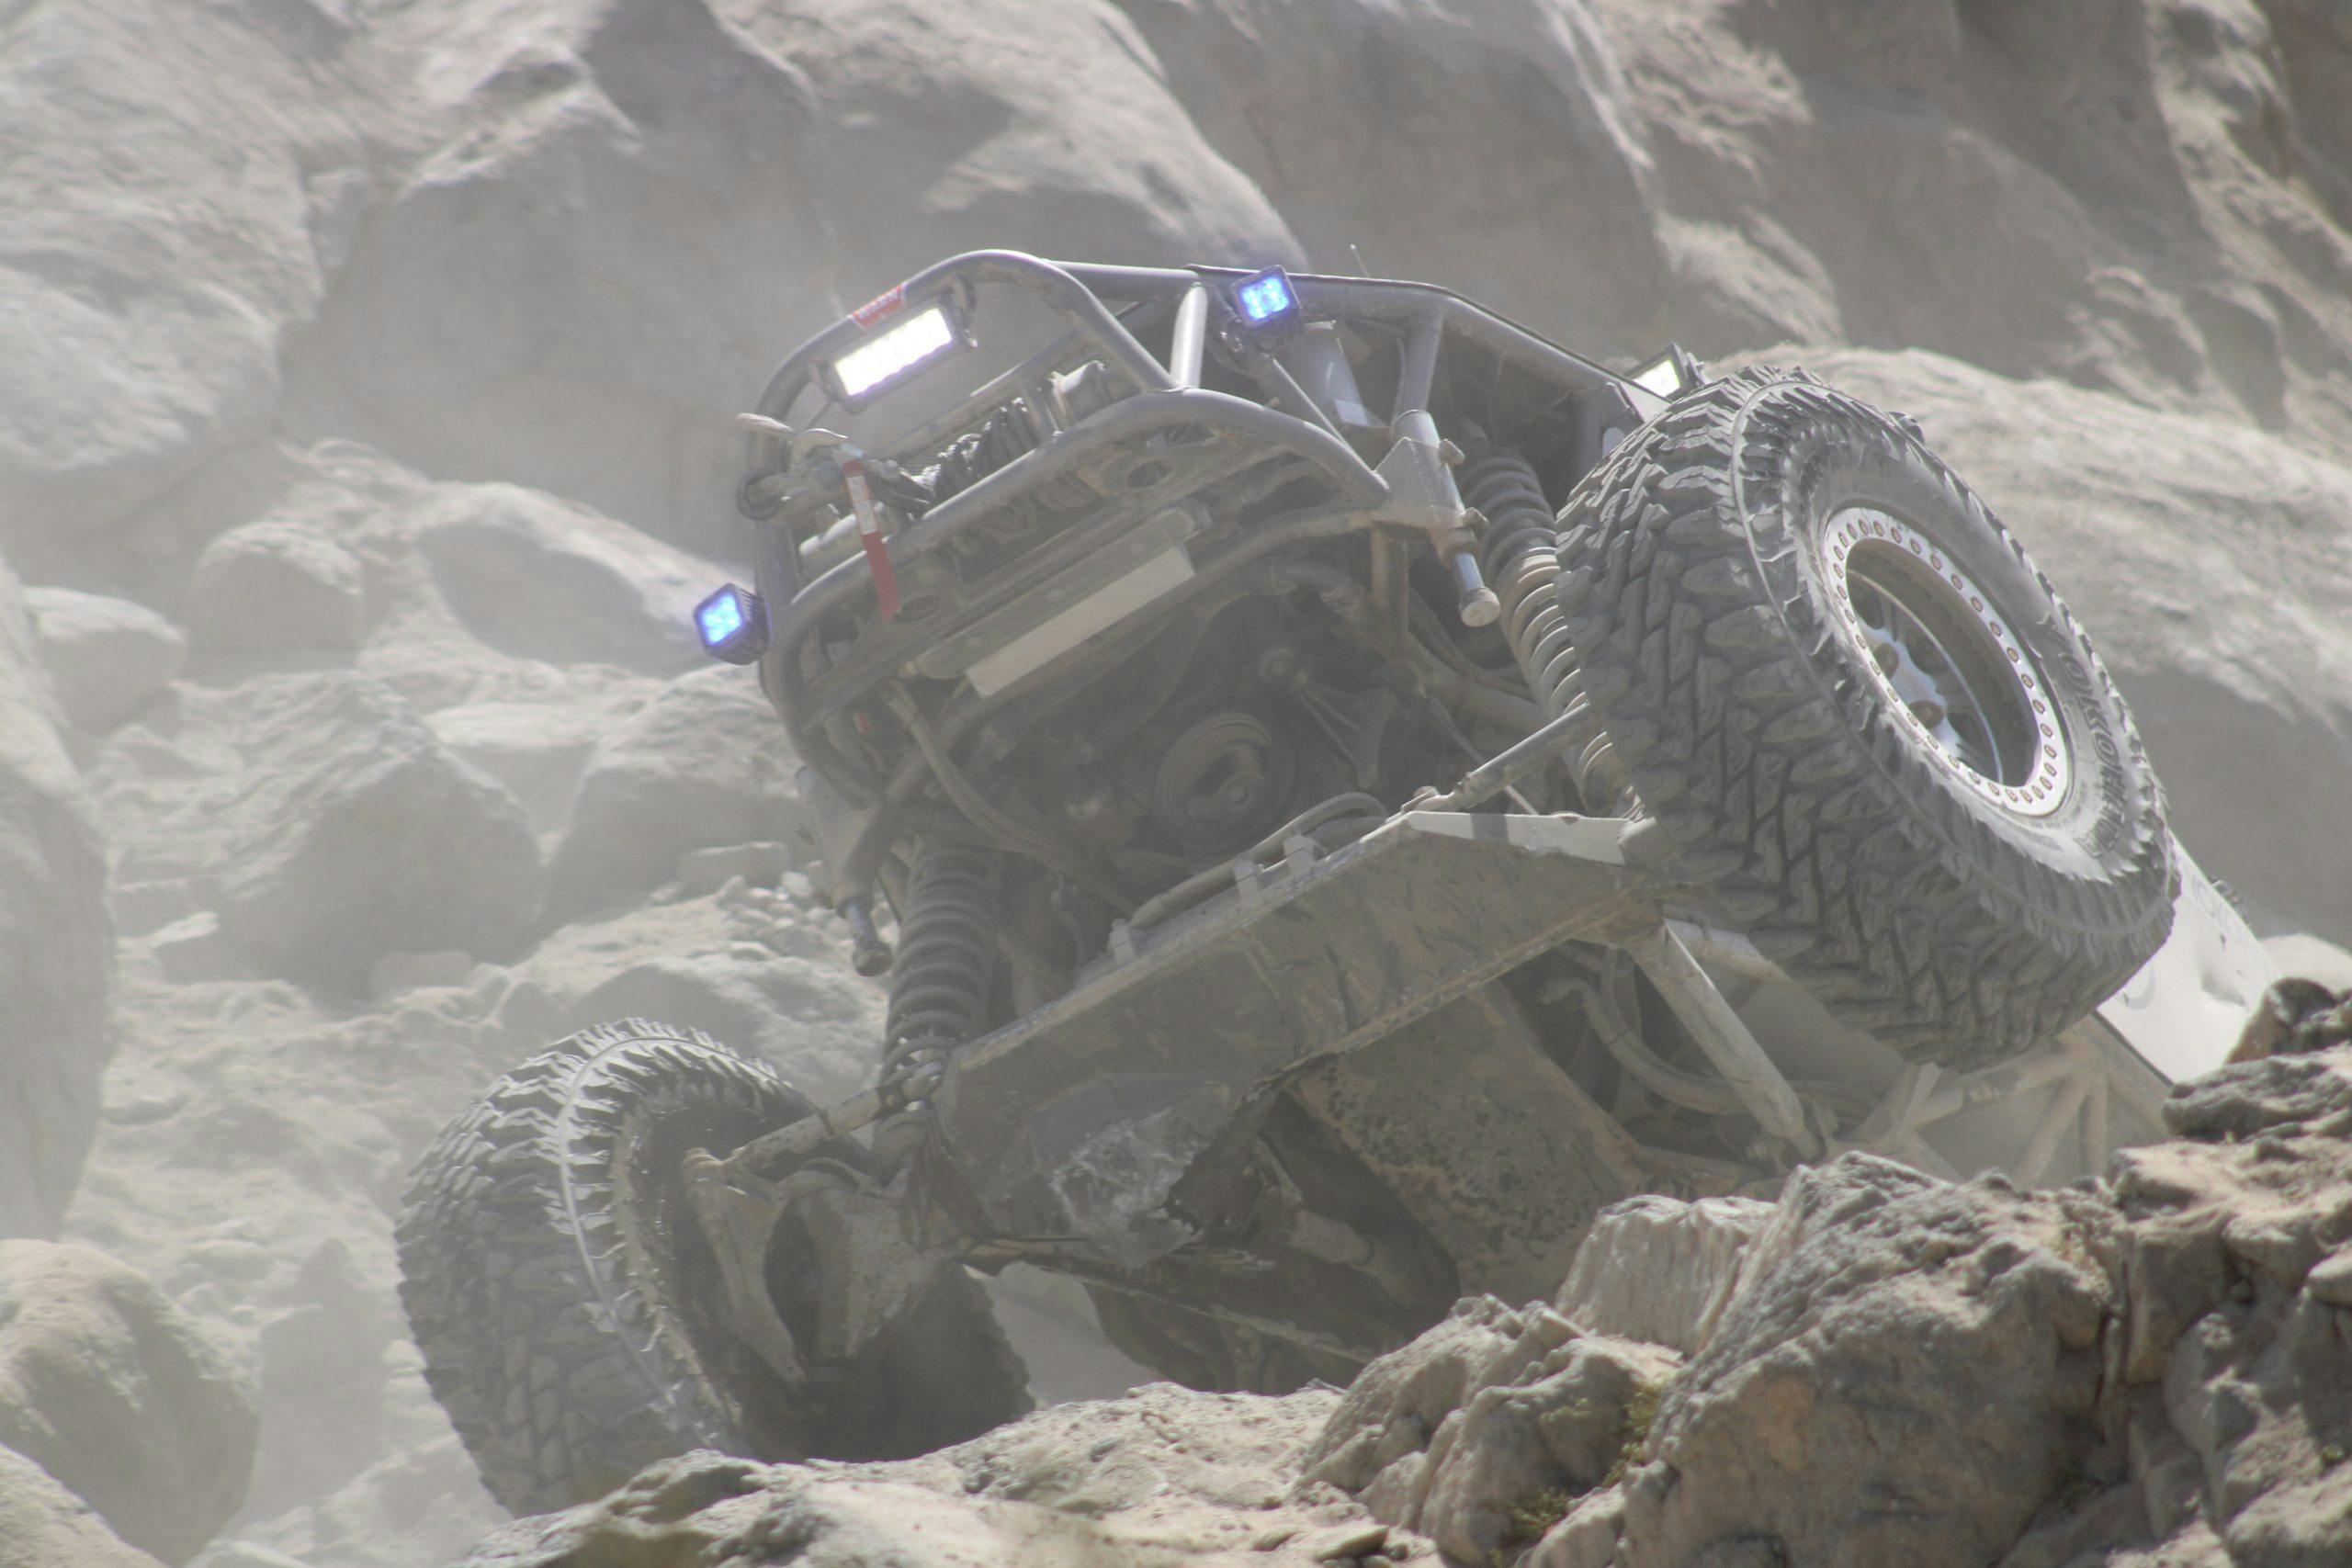 Ford Bronco King of Hammers wheels up